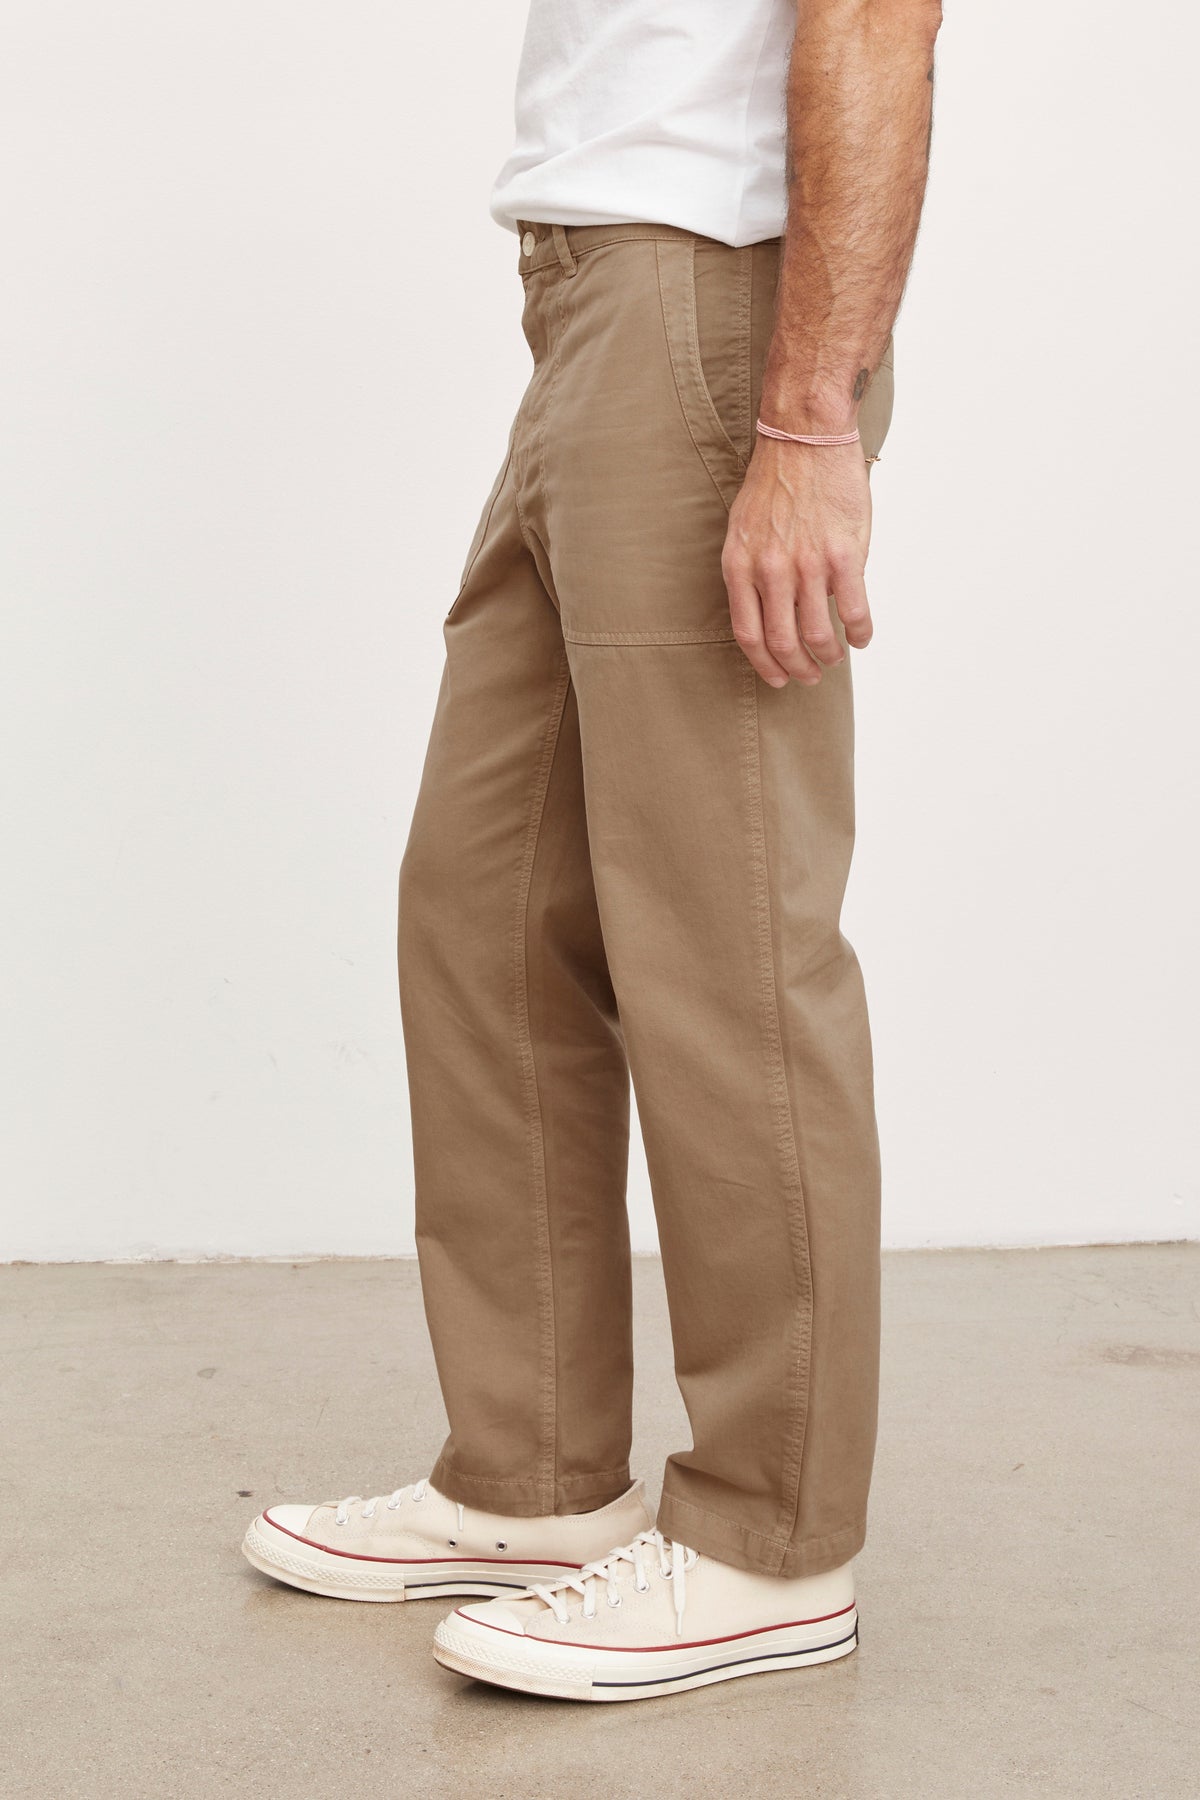 A man wearing Velvet by Graham & Spencer's TOBY SANDED TWILL PANT and white sneakers.-36009011085505